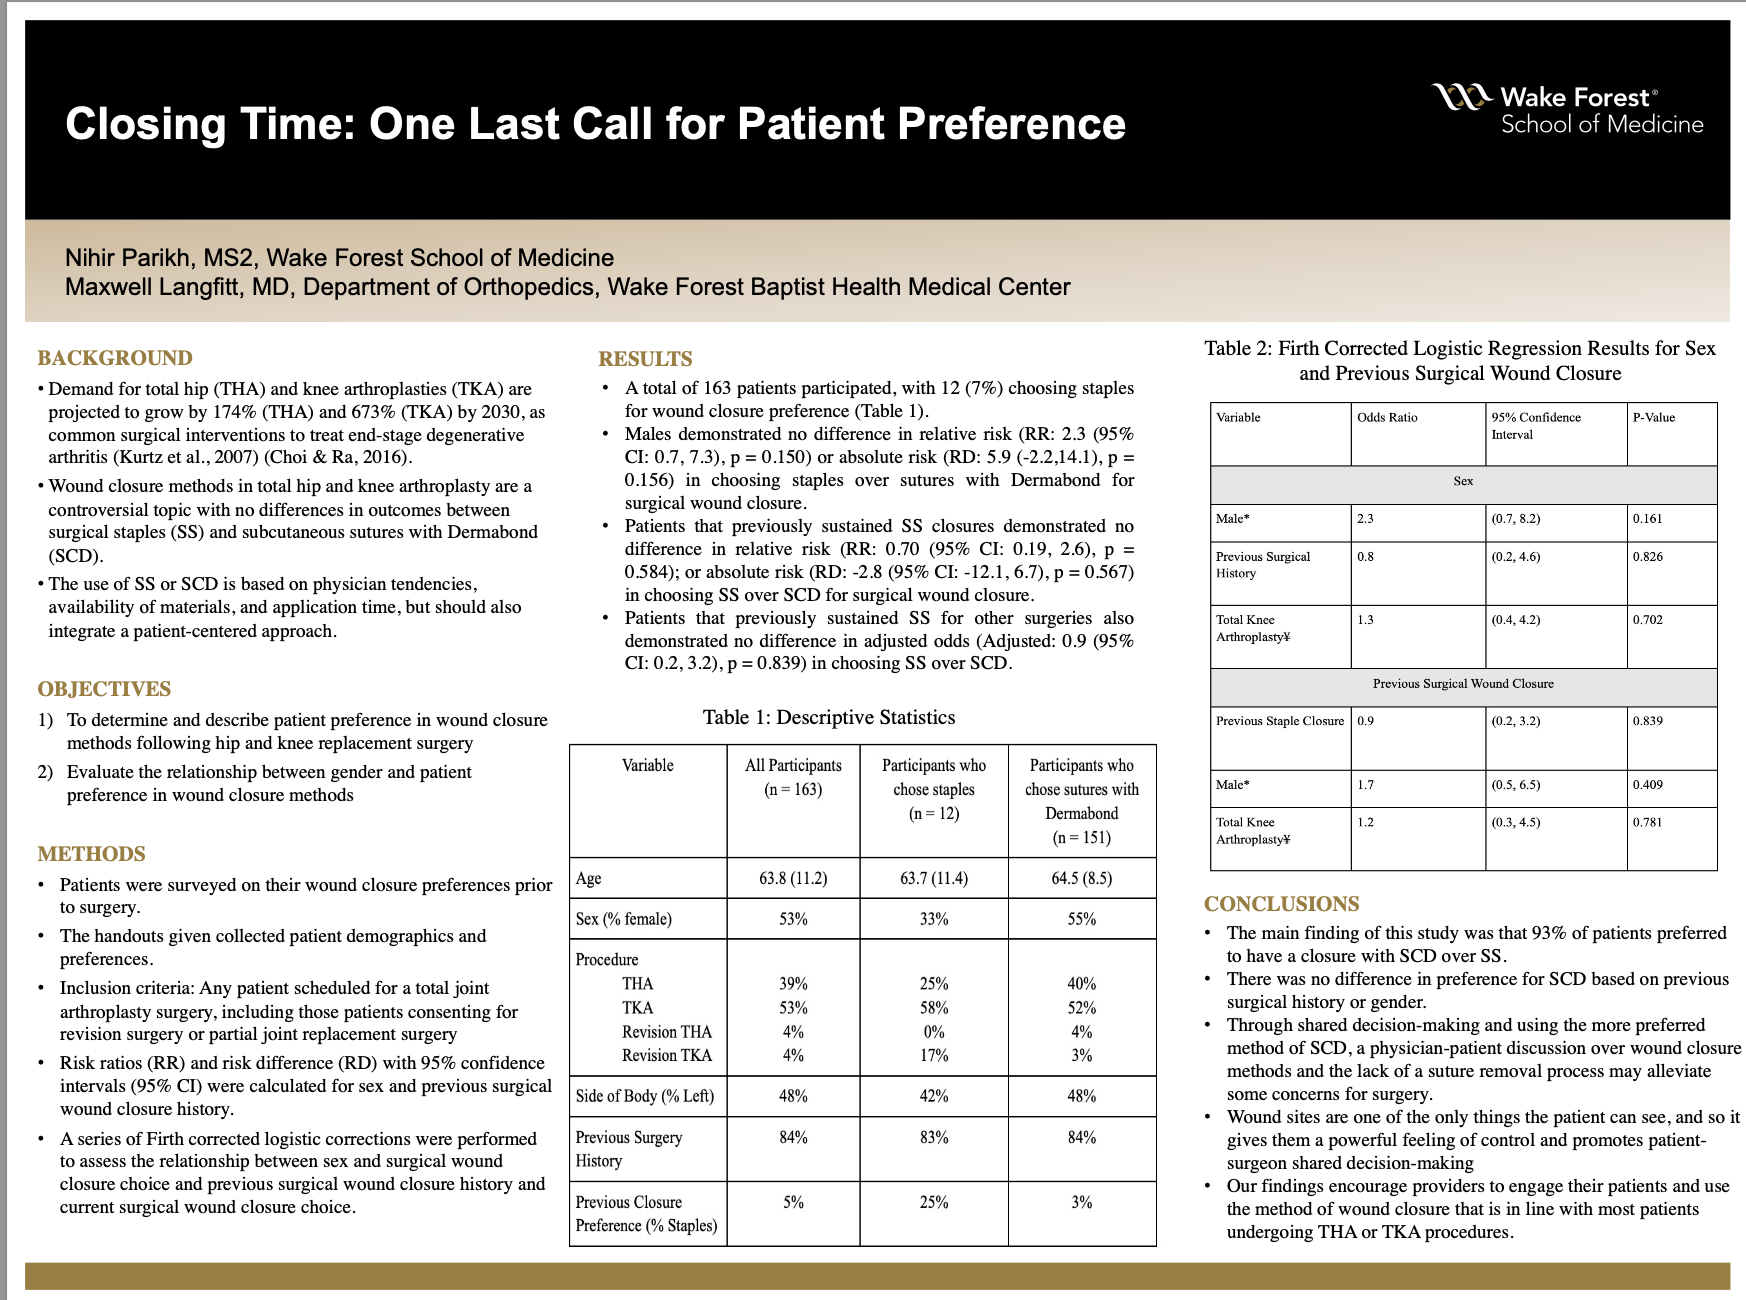 Showcase Image for Closing Time: One Last Call for Patient Preference